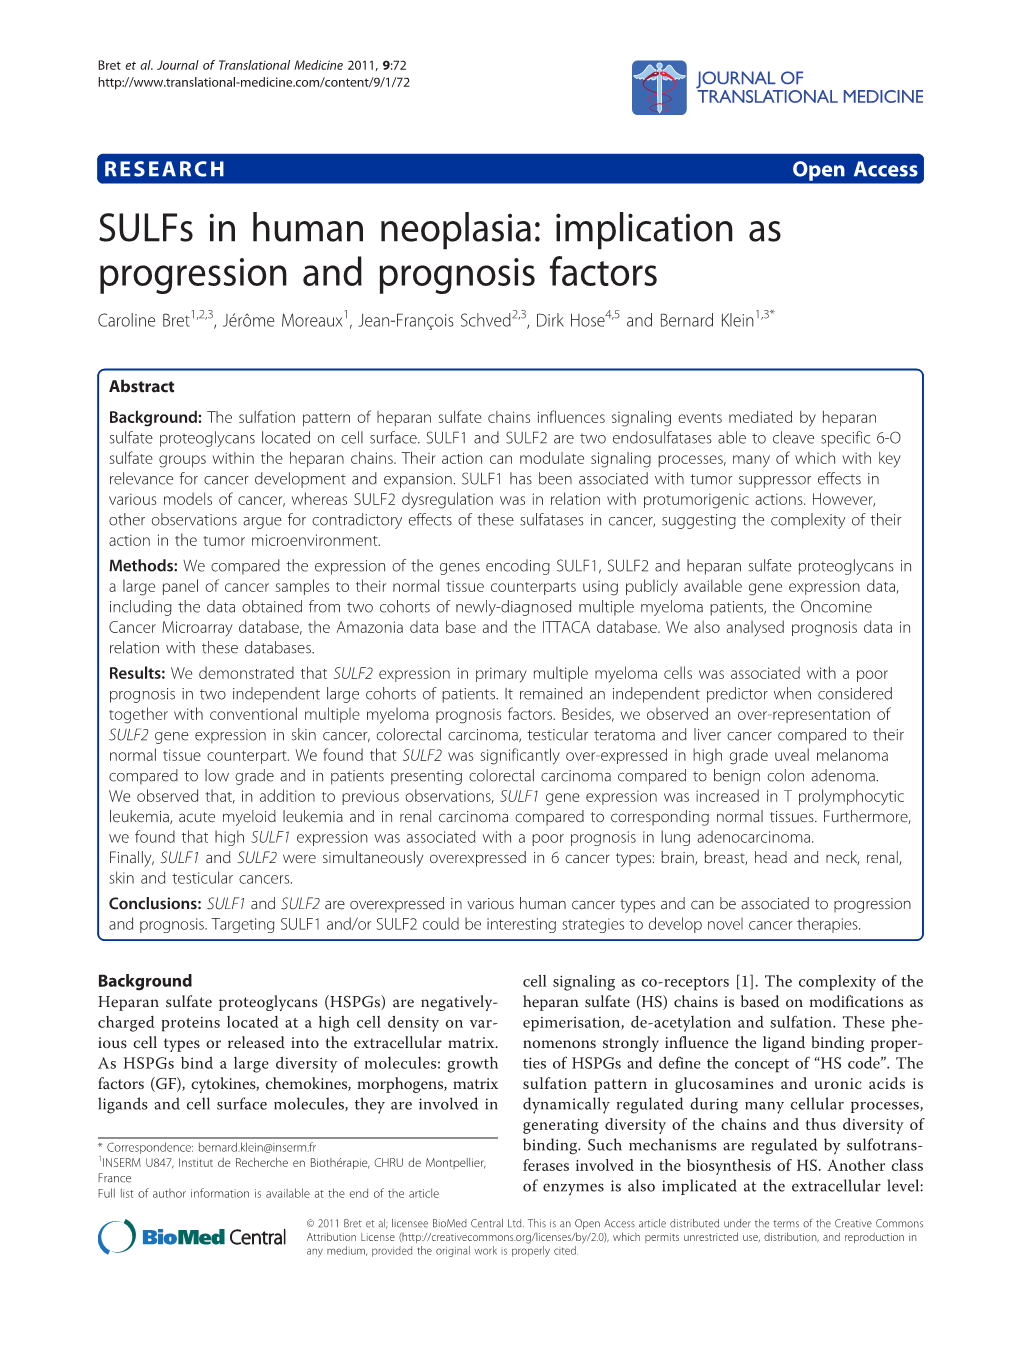 Sulfs in Human Neoplasia: Implication As Progression And